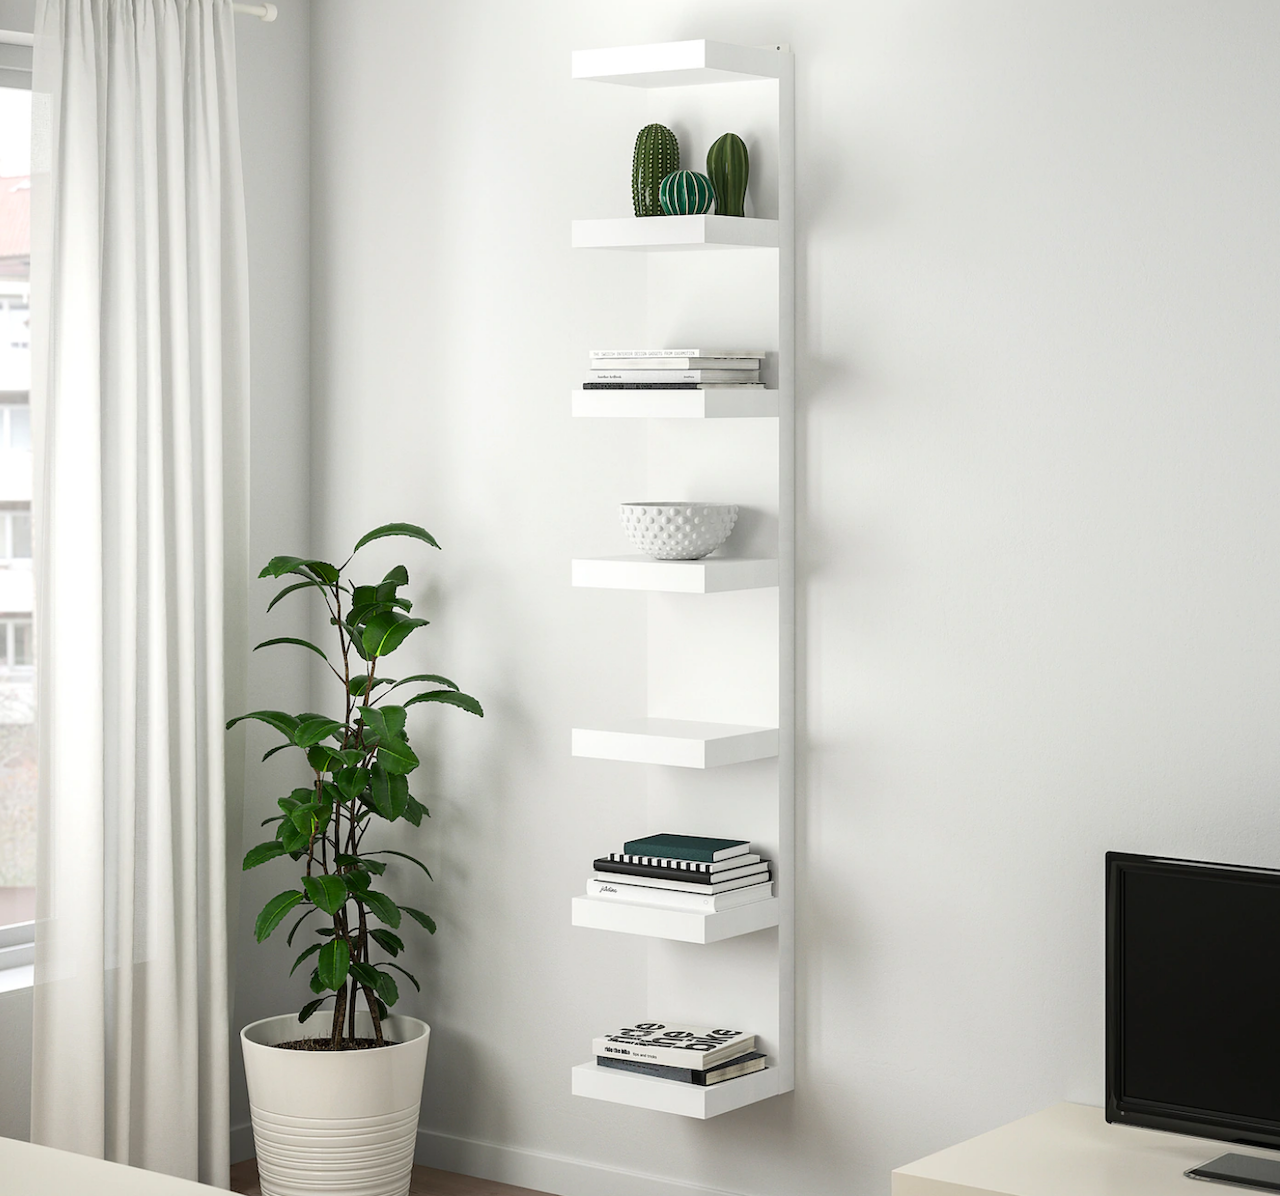 IKEA cheap shelves white wall unit with books and plant next to it